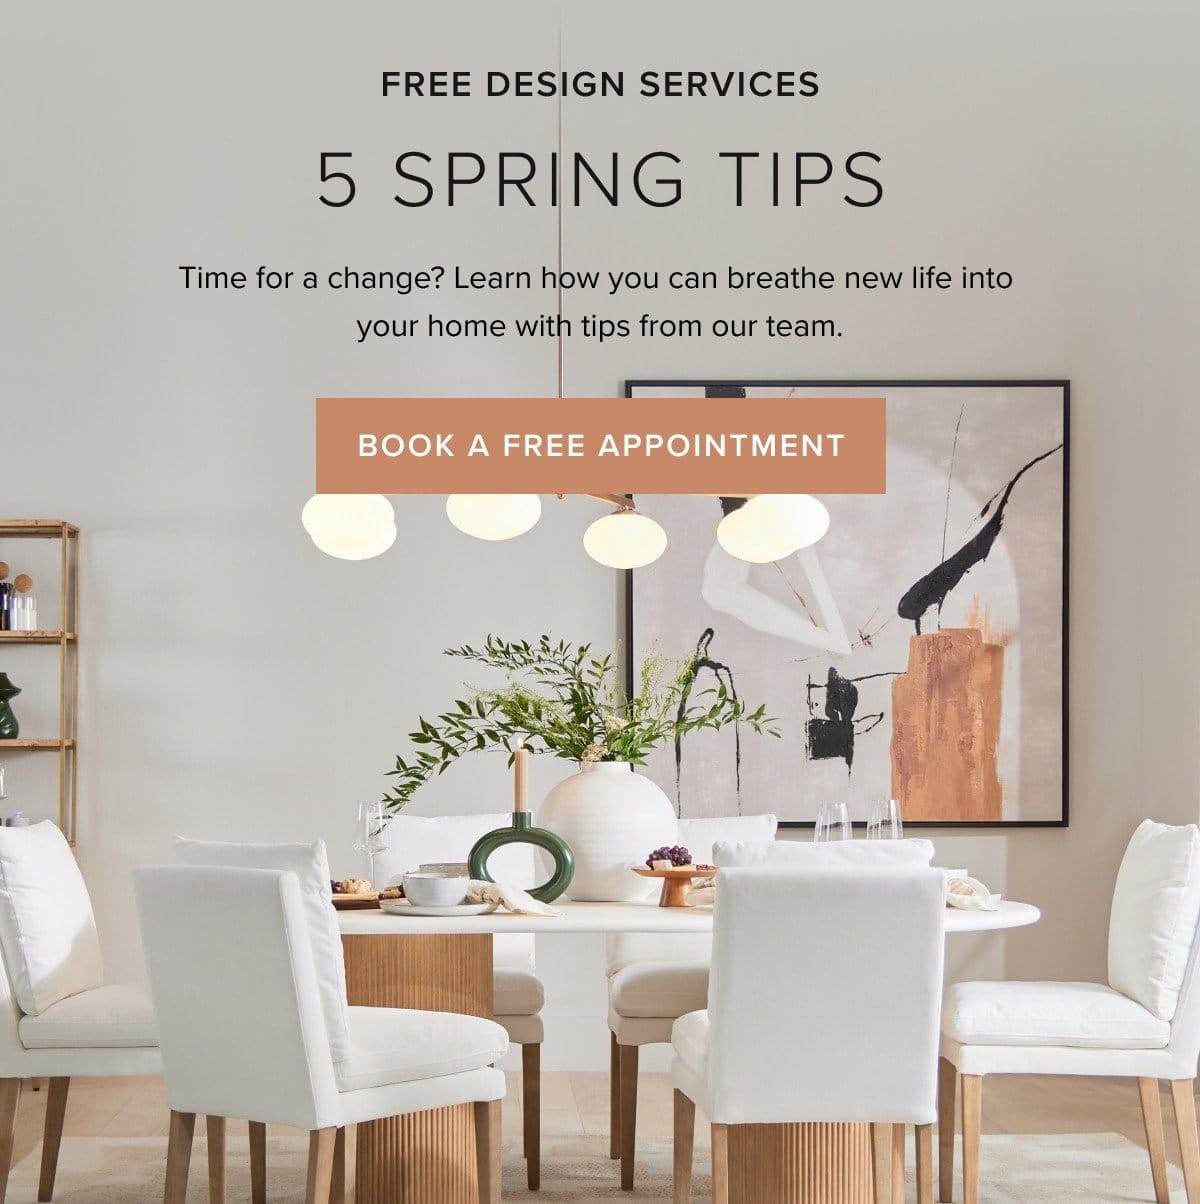 free design services 5 spring tips. book a free appointment